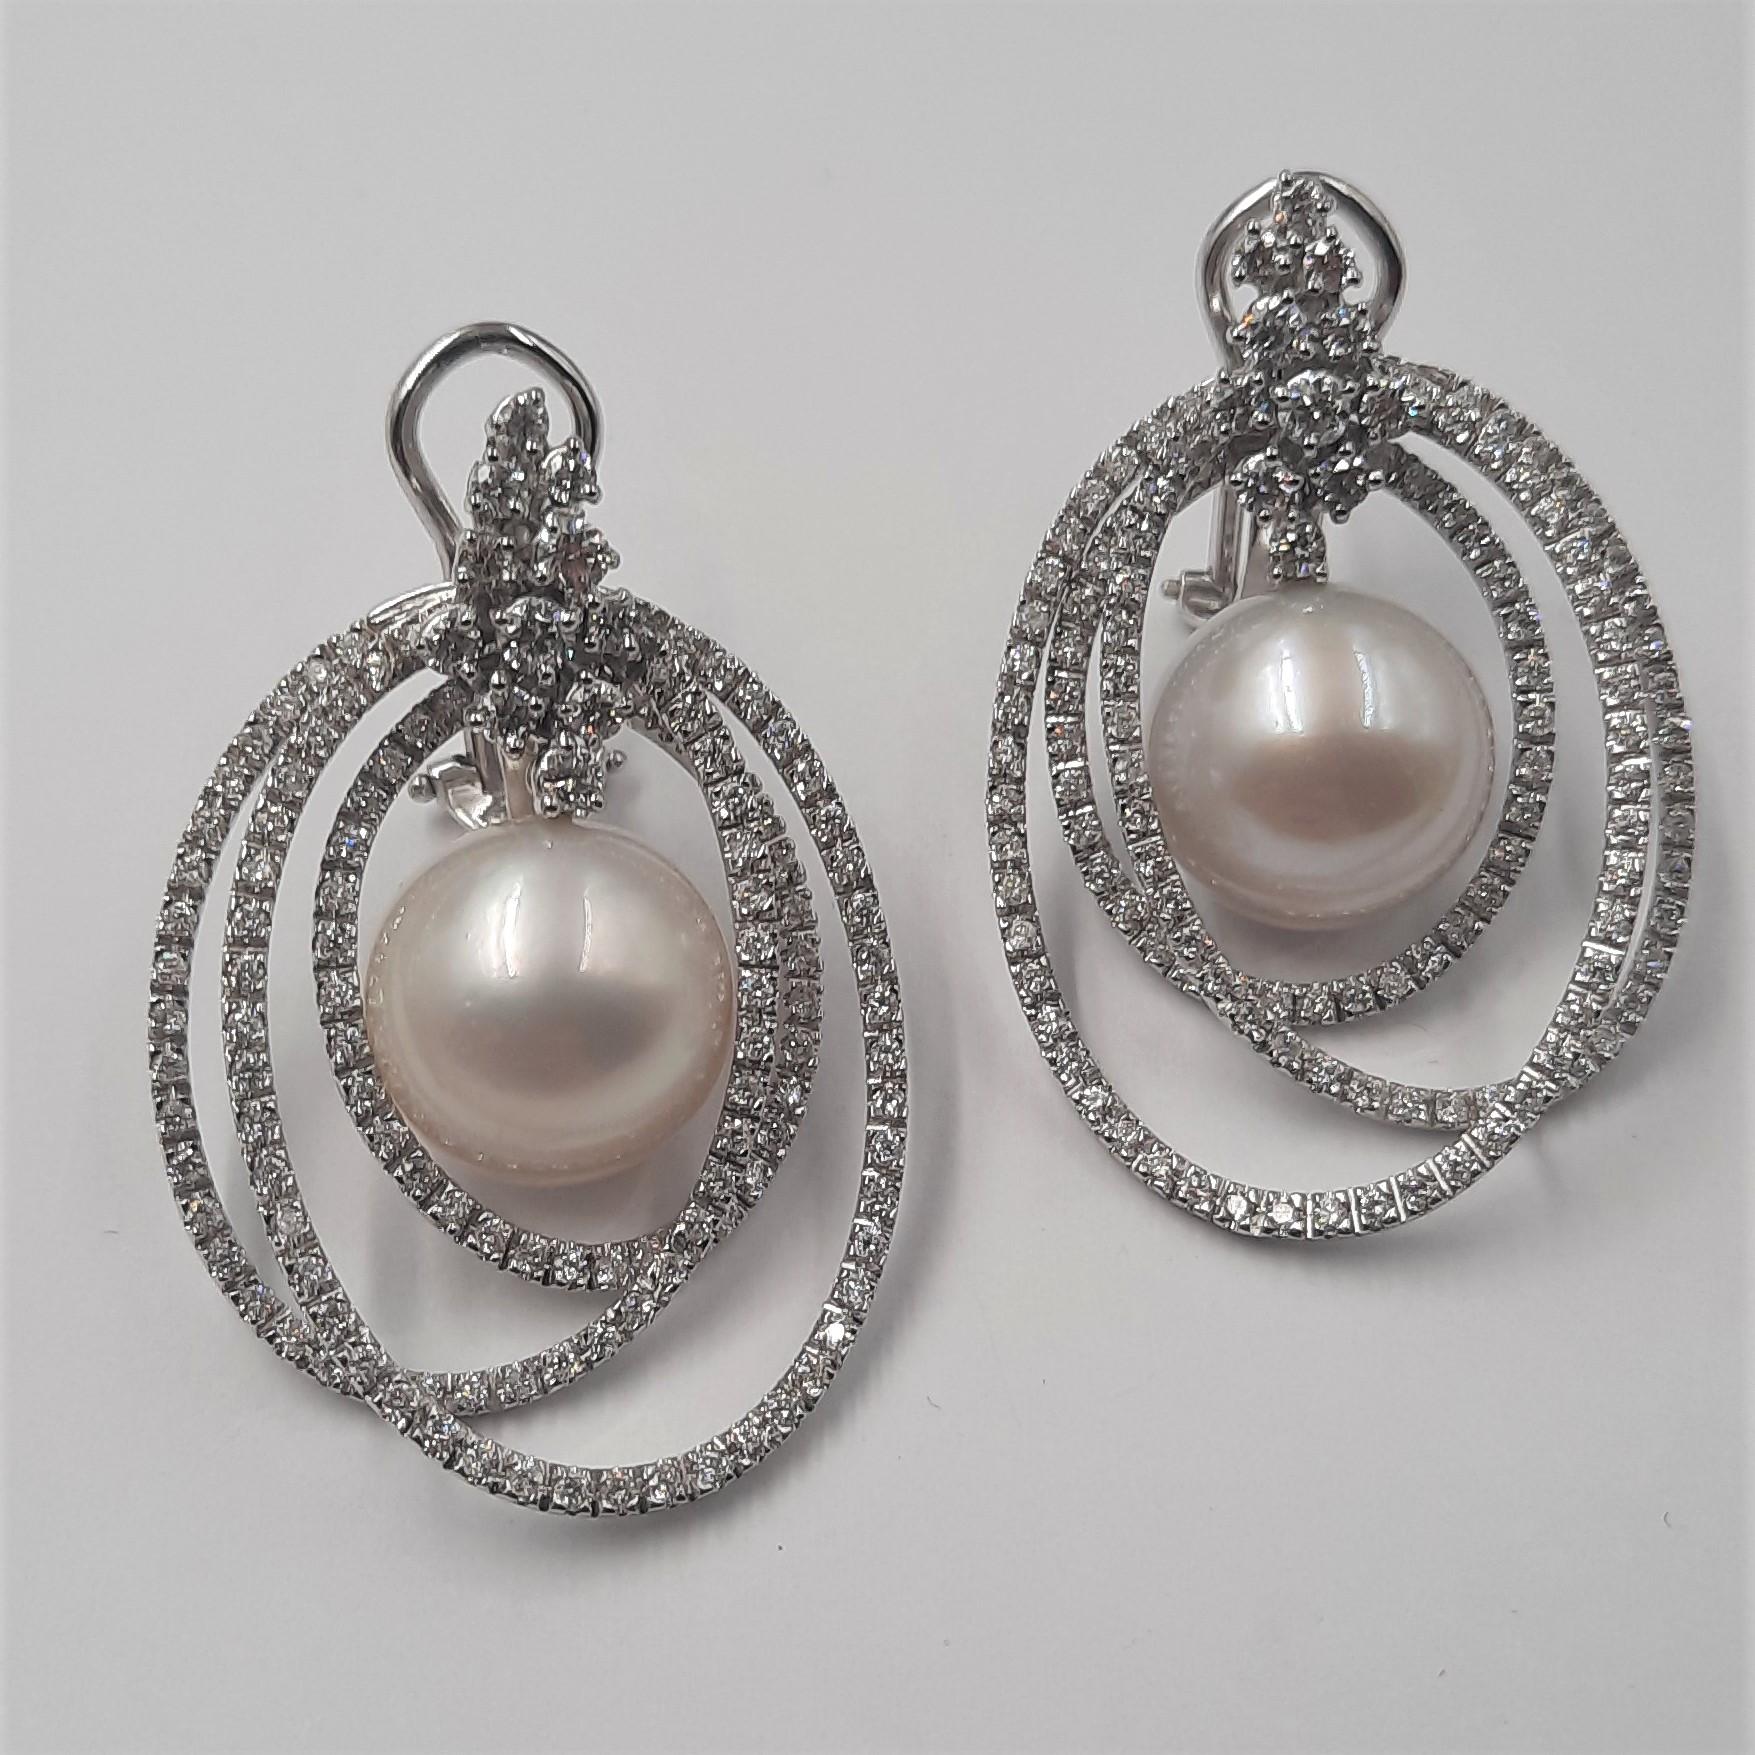 Beautiful Italian brilliant cut diamond (3 carats),S Australian sea pearl (40.84 carats) and 18 carats white gold (16.4 grams) earrings. The earrings are eventually part of a set, with pendant (see). 